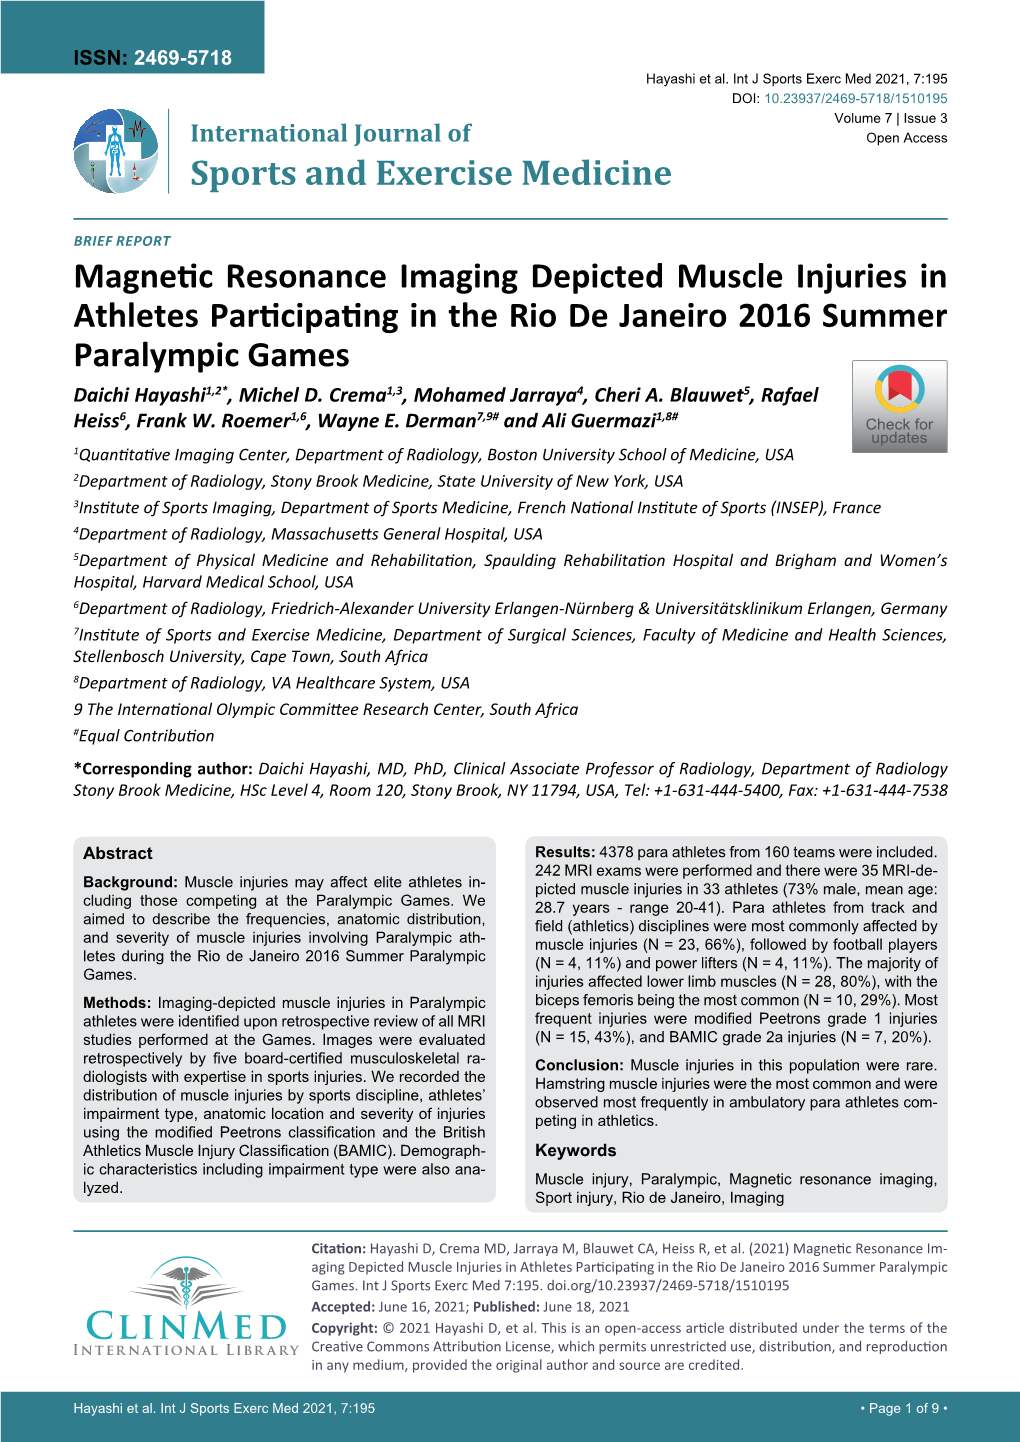 Magnetic Resonance Imaging Depicted Muscle Injuries in Athletes Participating in the Rio De Janeiro 2016 Summer Paralympic Games Daichi Hayashi1,2*, Michel D